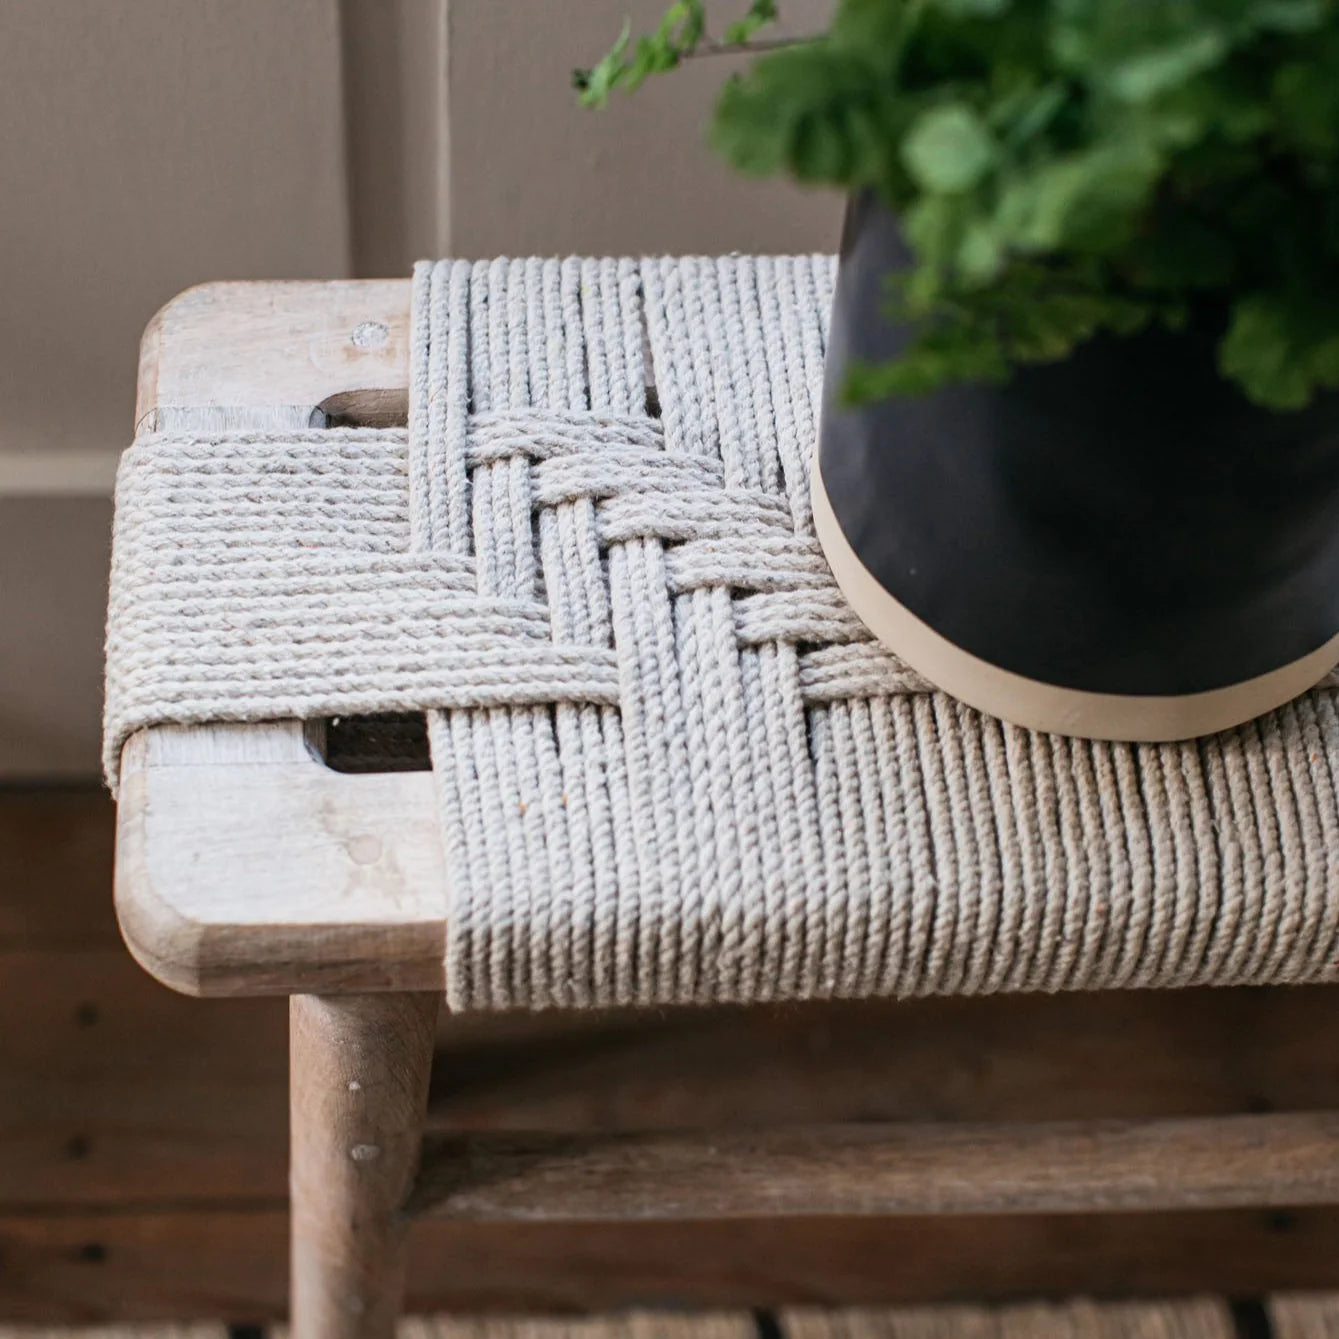 The rope detail on the Lulworth Rustic Wooden Side Table, with a plant in a black ceramic pot.